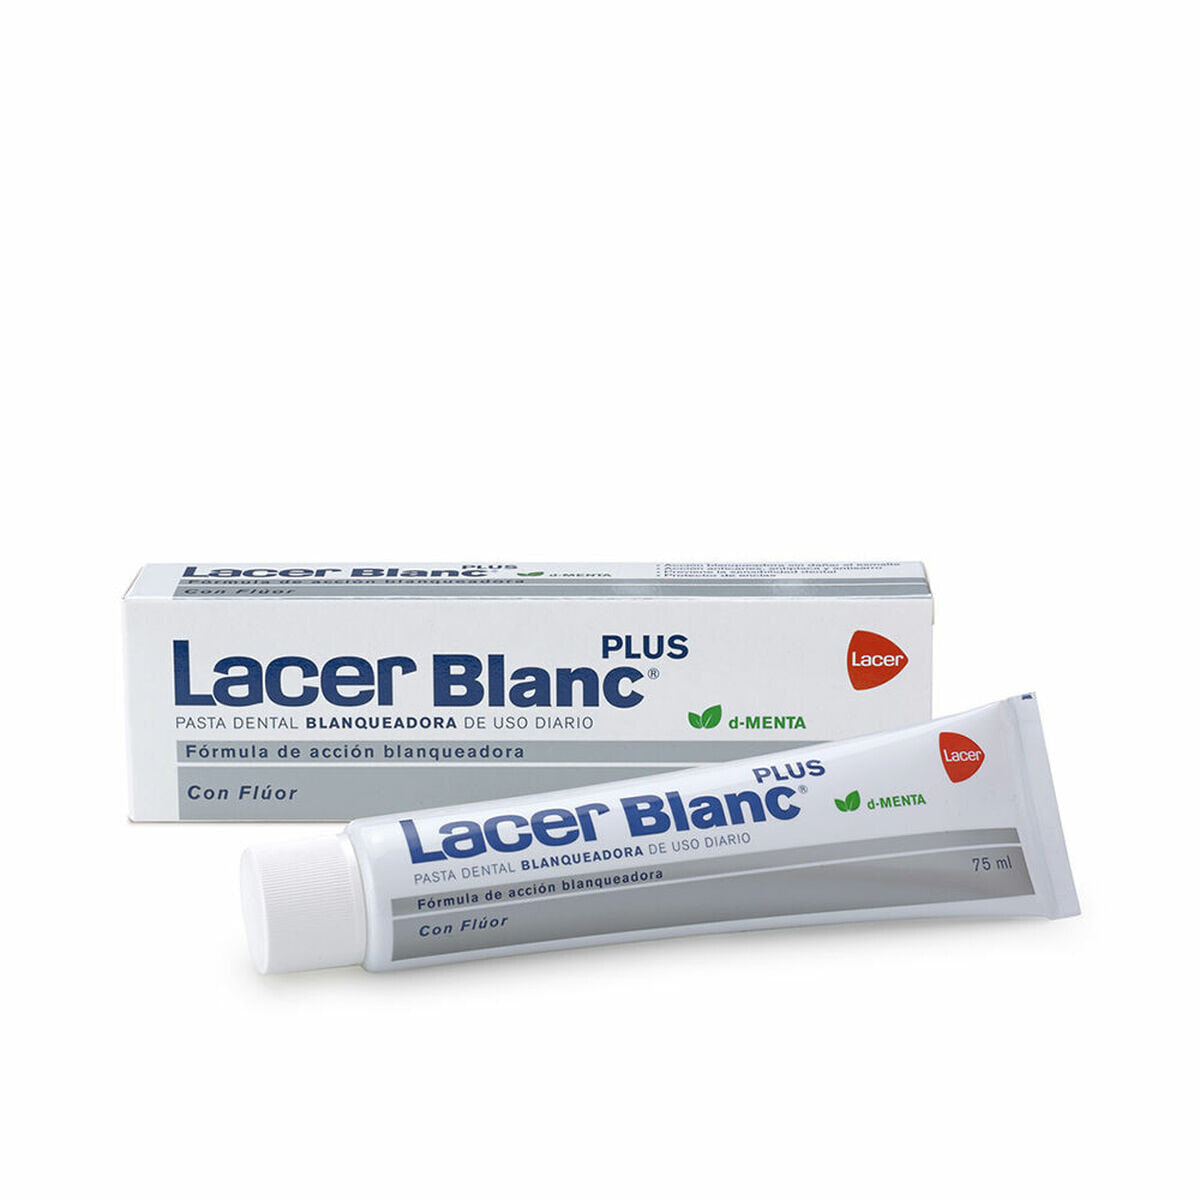 Whitening toothpaste Lacer Blanc Mint (75 ml)